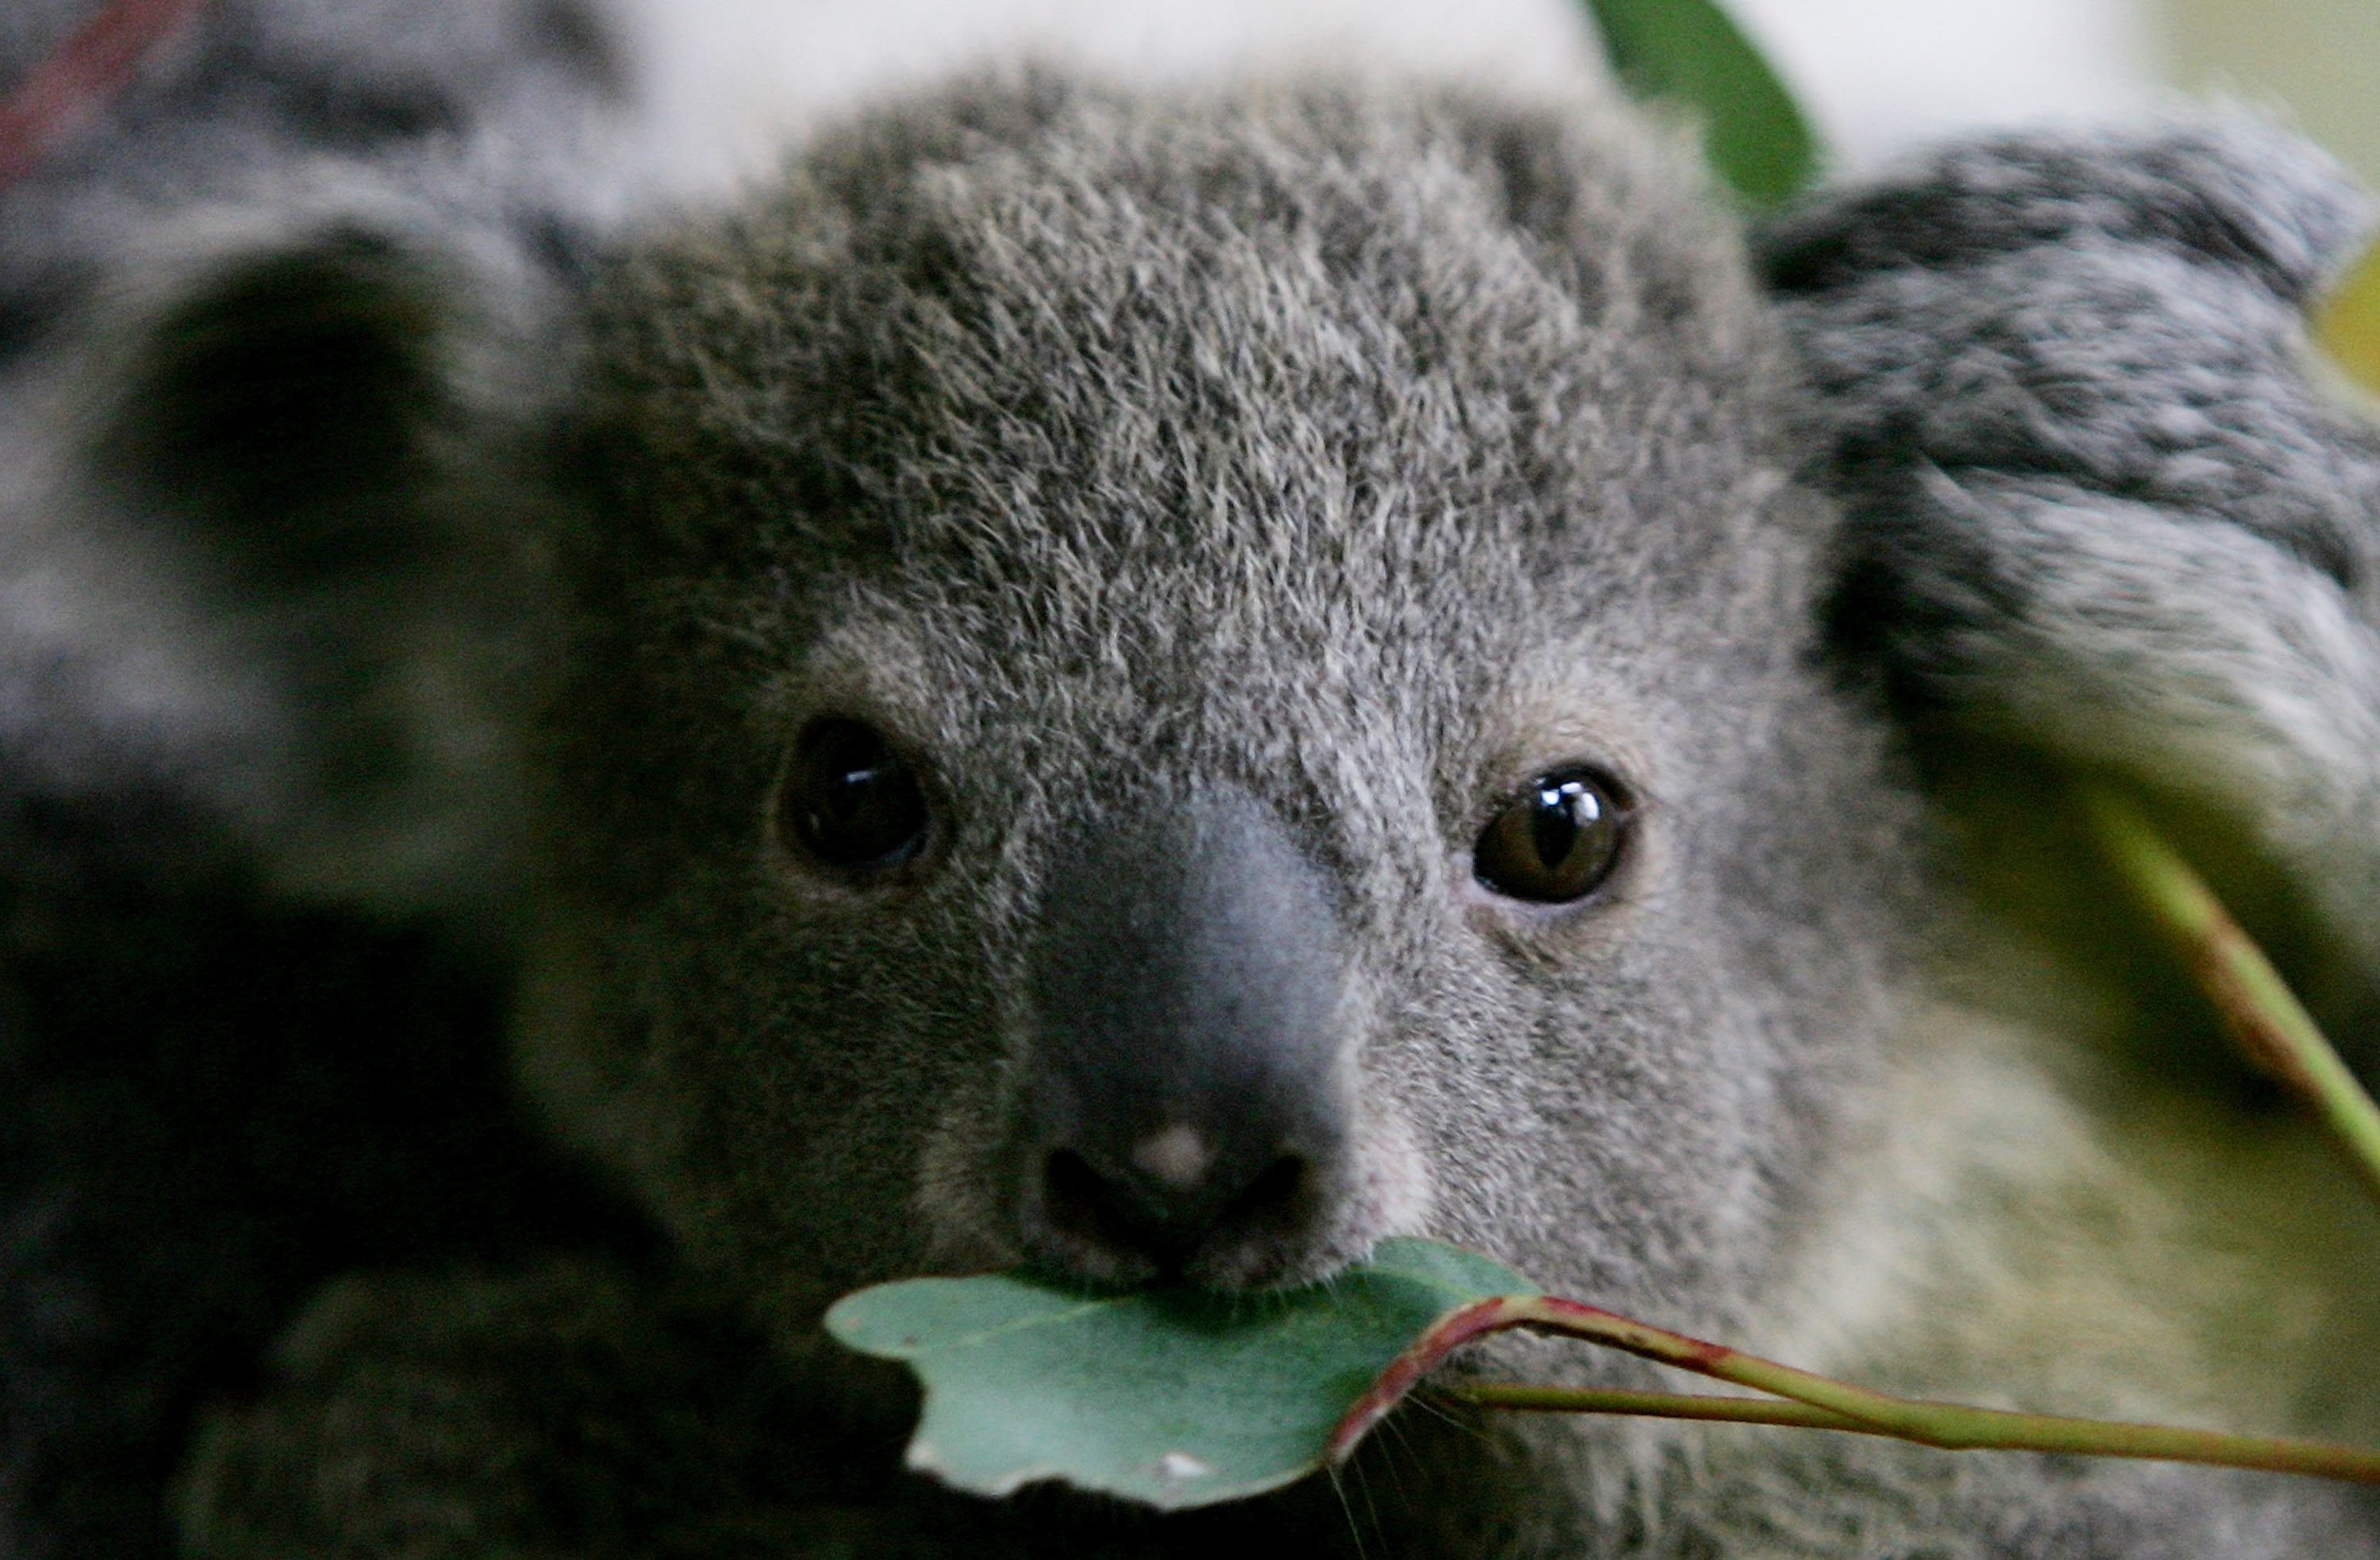 ‘We want to see koala populations recover’